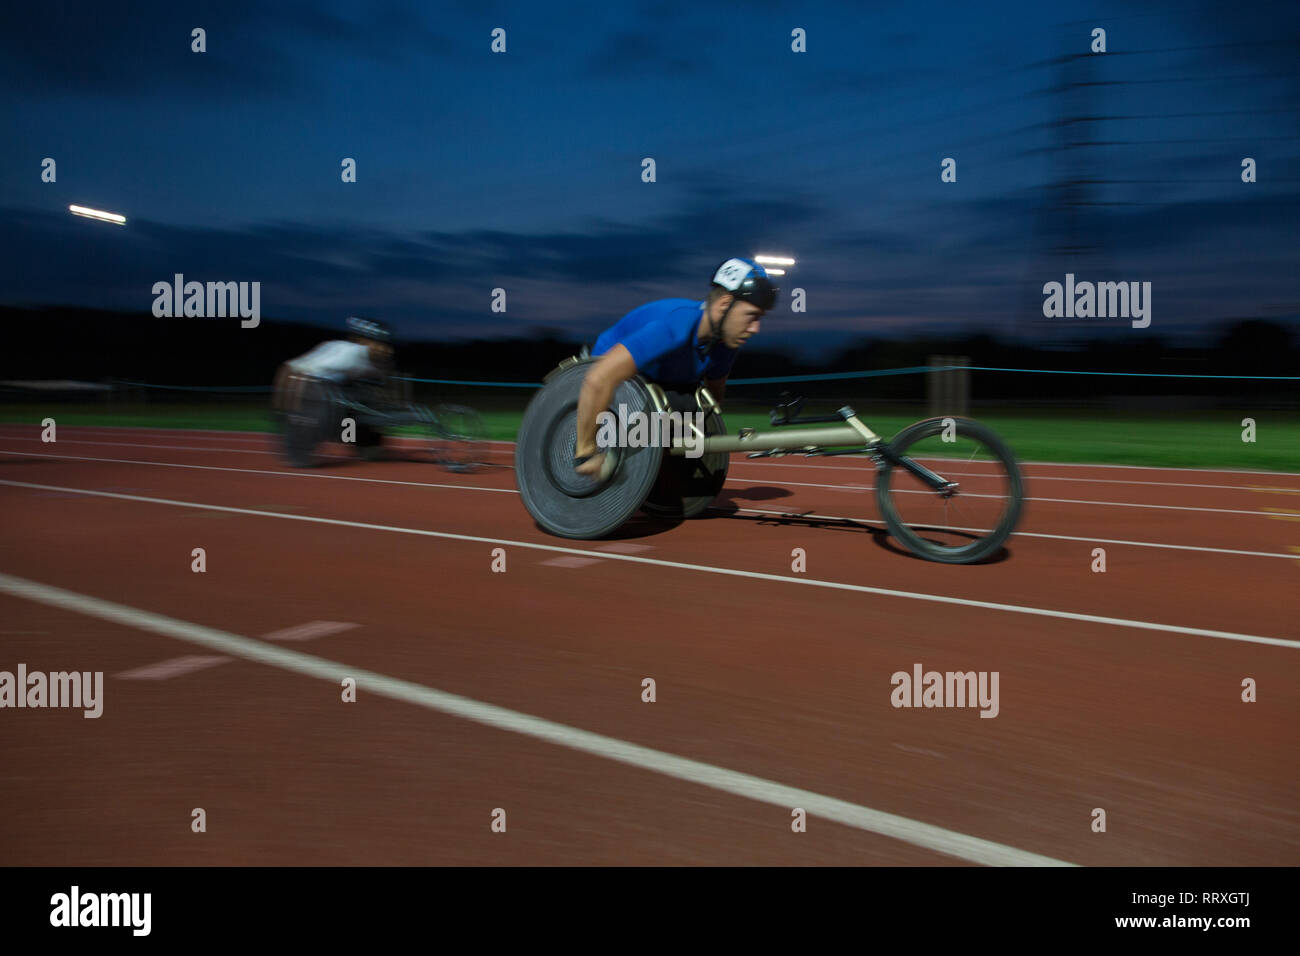 Determined young male paraplegic athlete speeding along sports track in wheelchair race at night Stock Photo